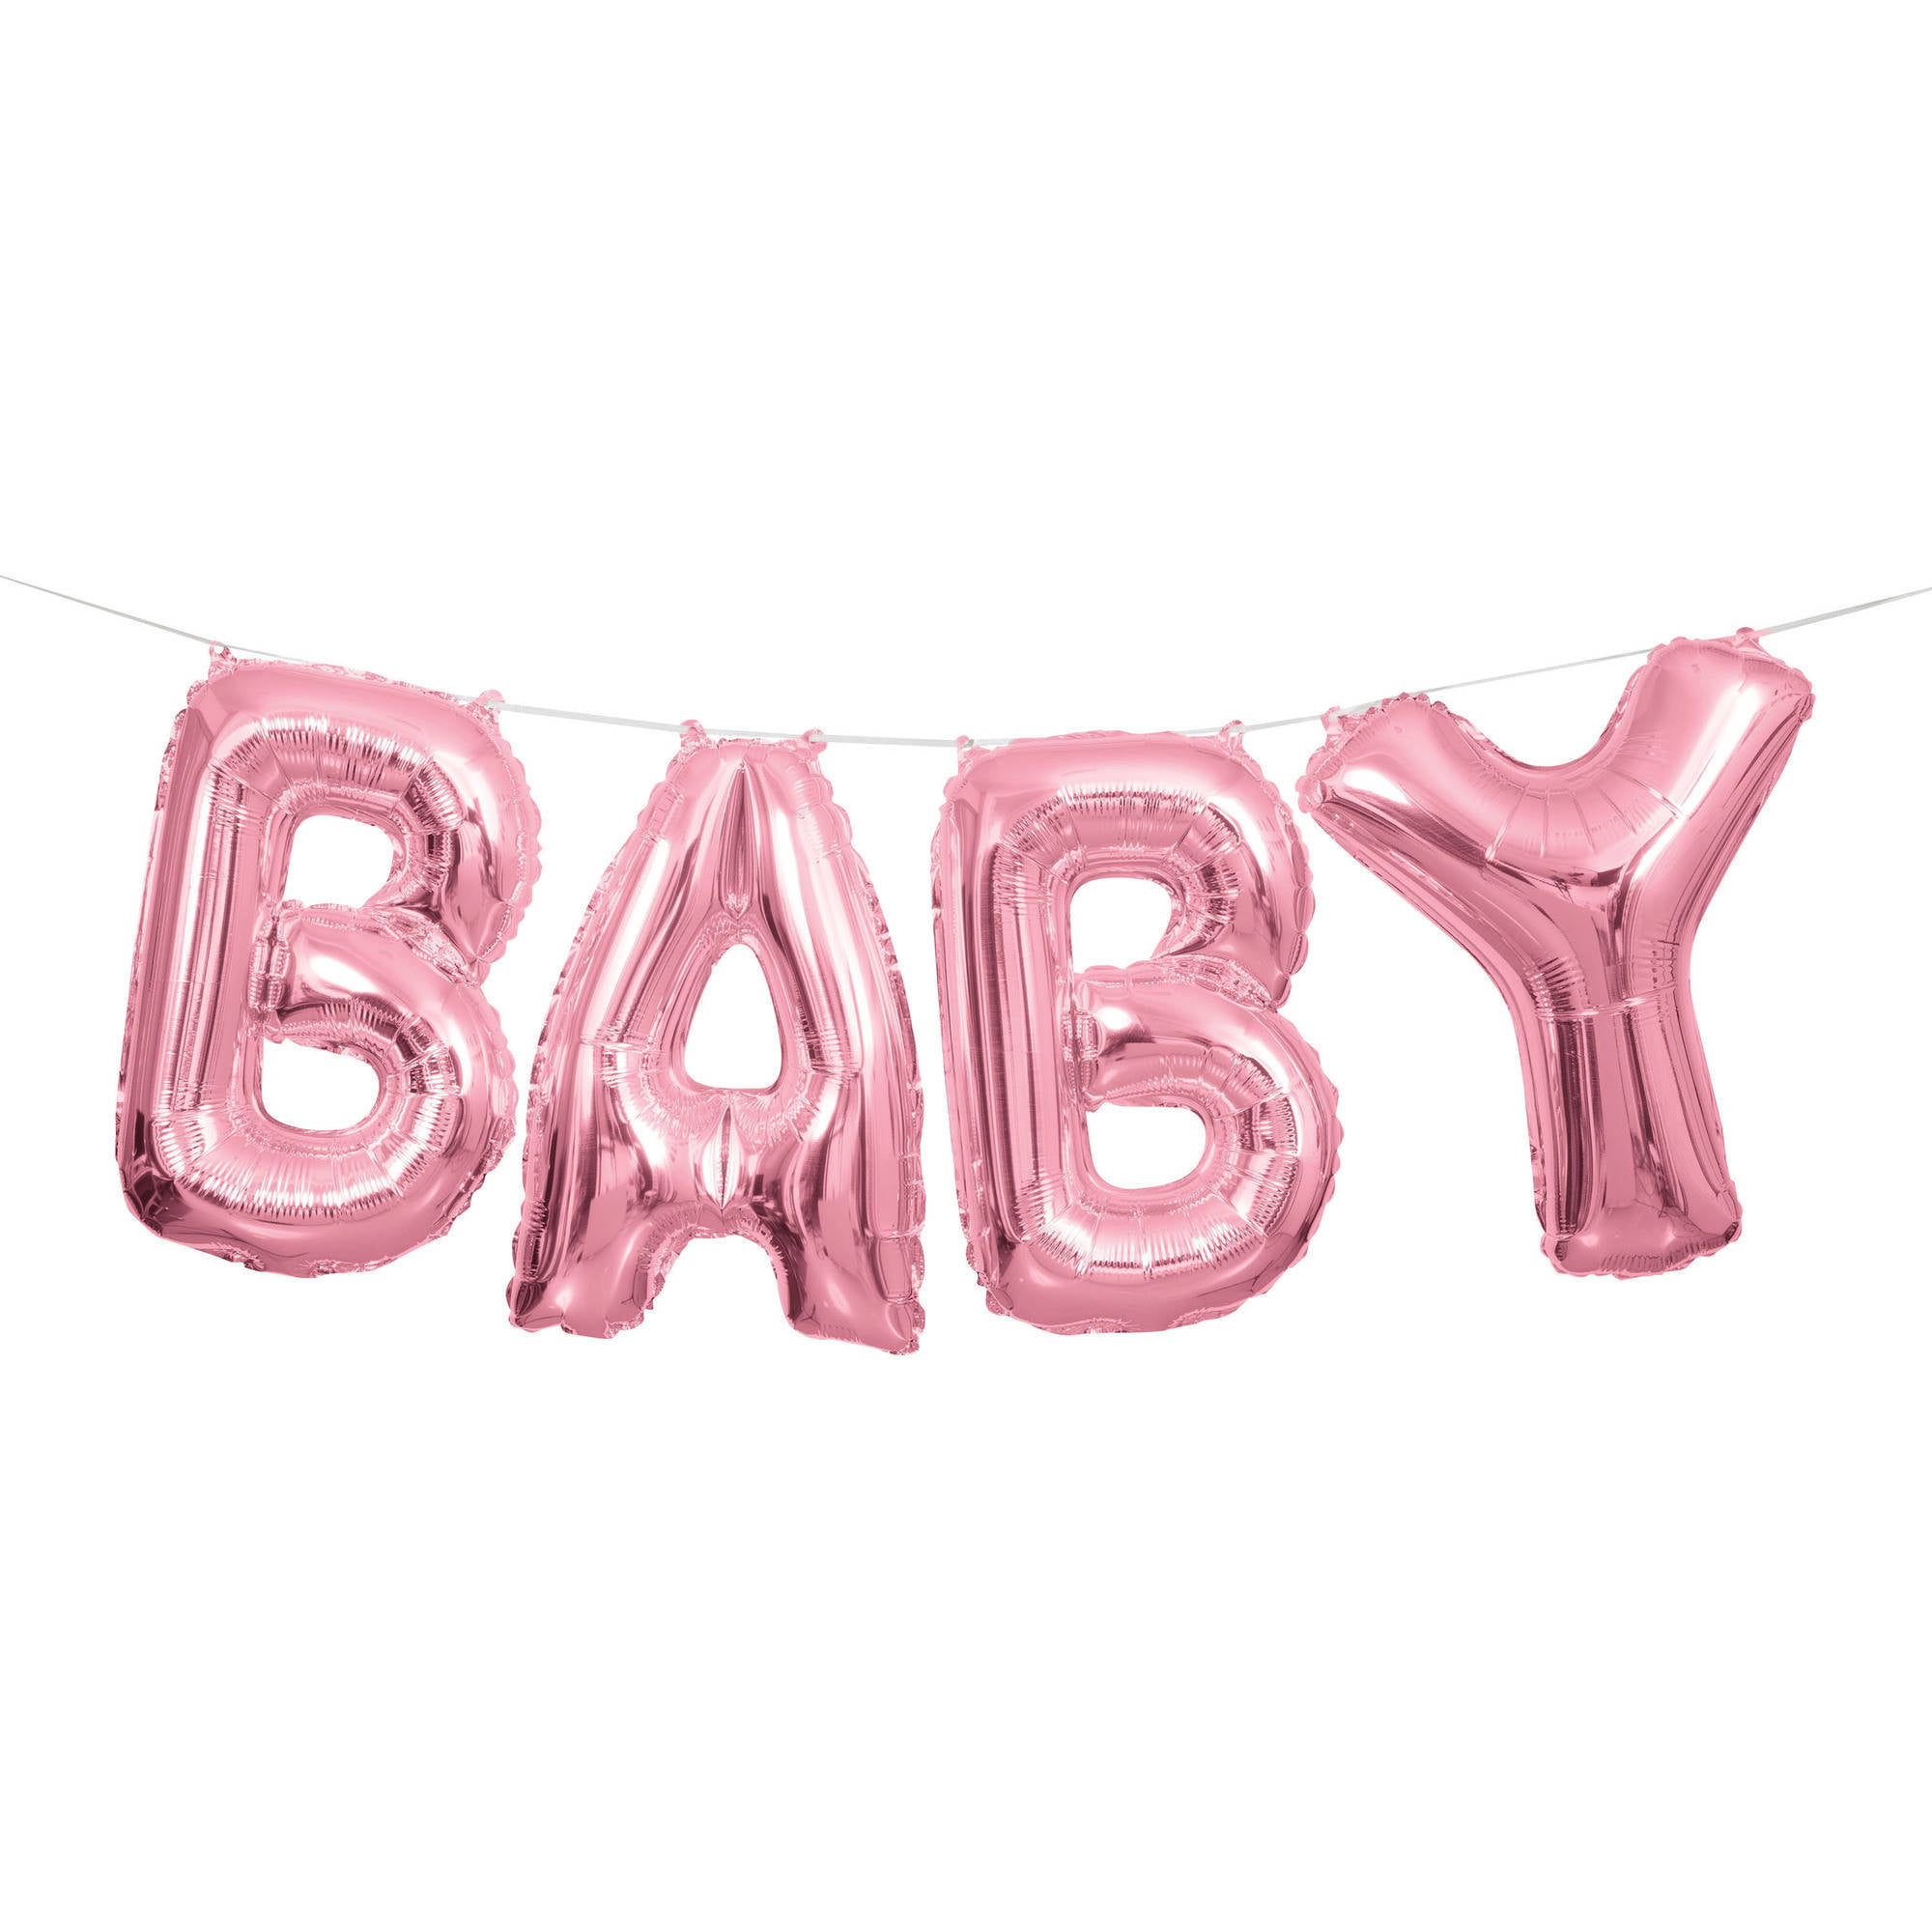 Over 5 ft wide PINK Personalized Giant Banner Kit NEW Details about   IT'S A BABY GIRL! 